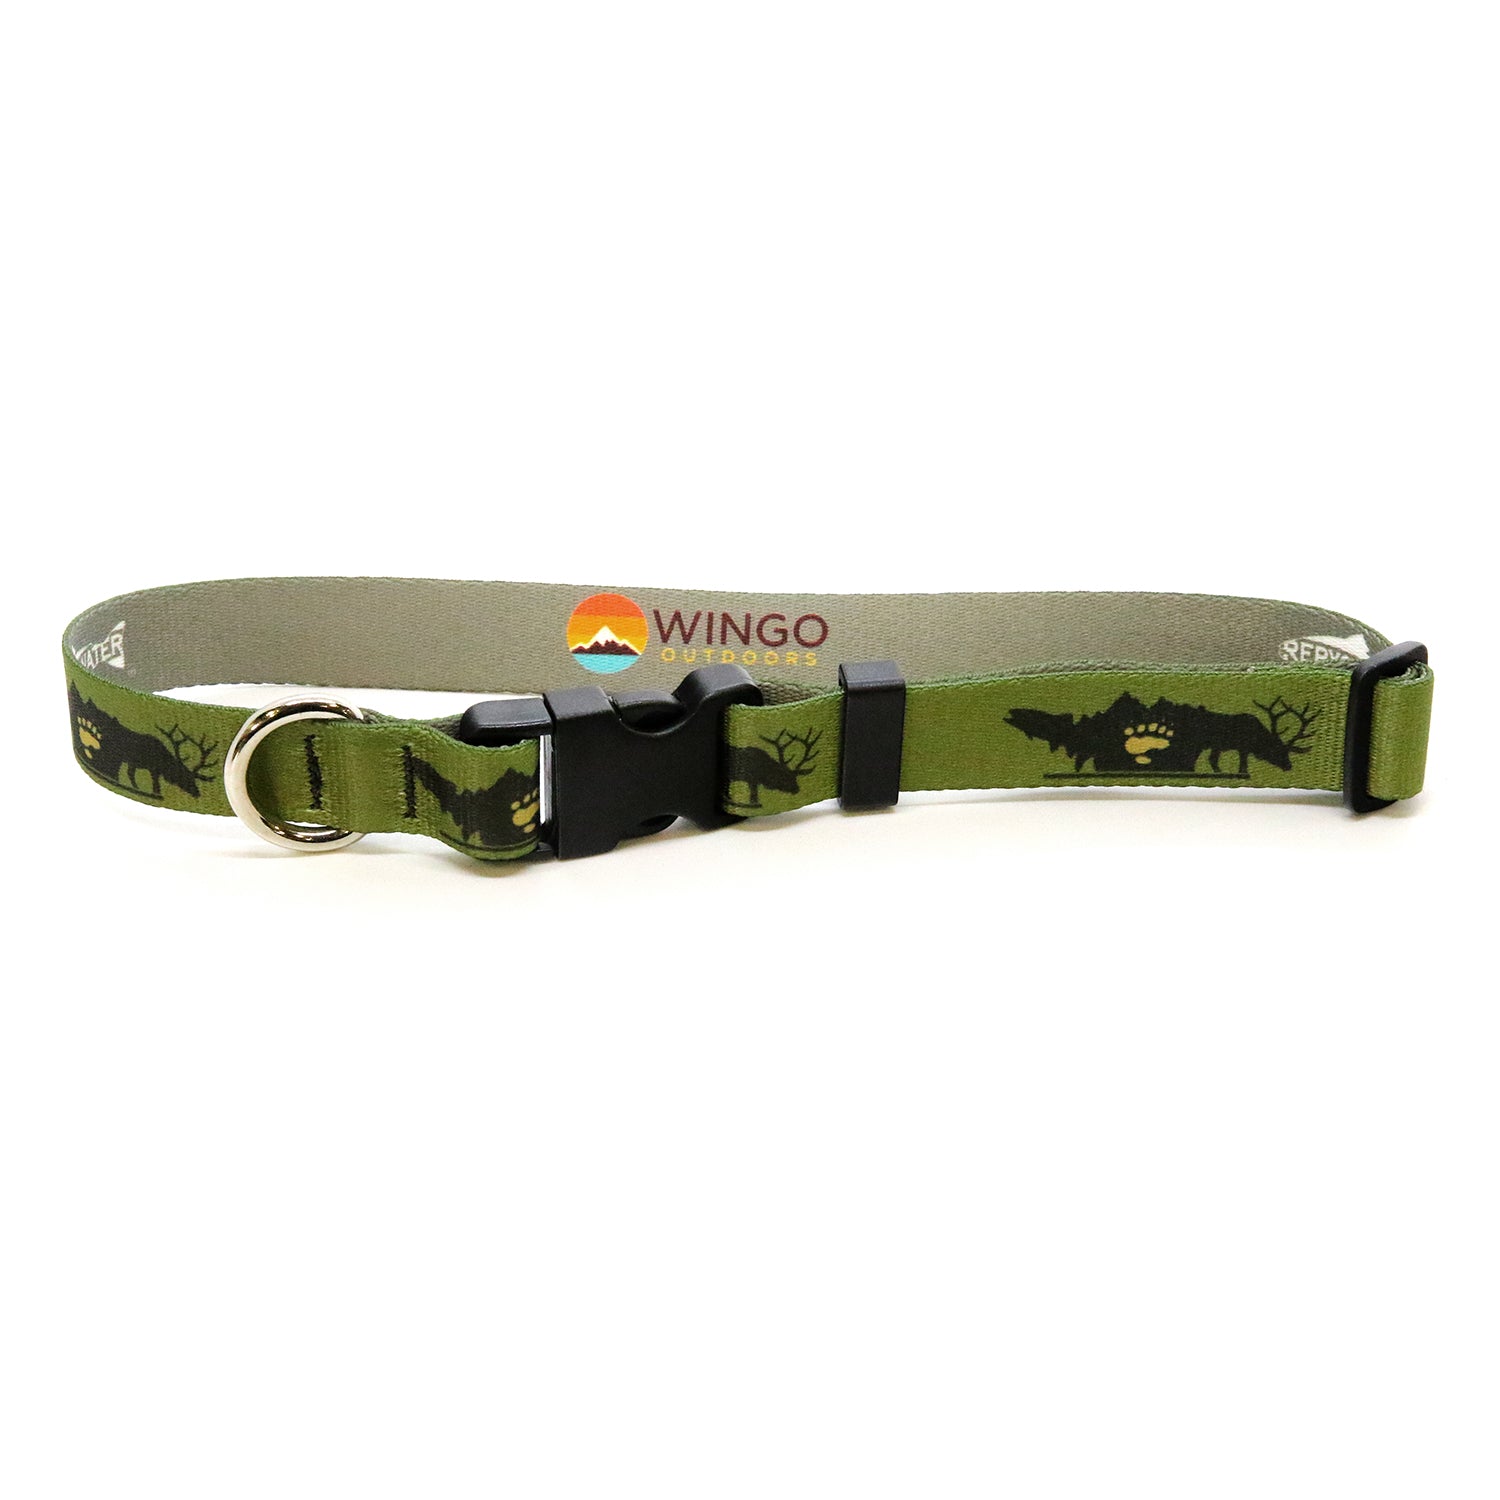 A green dog collar with a design of a trout bear paw and elk is shown